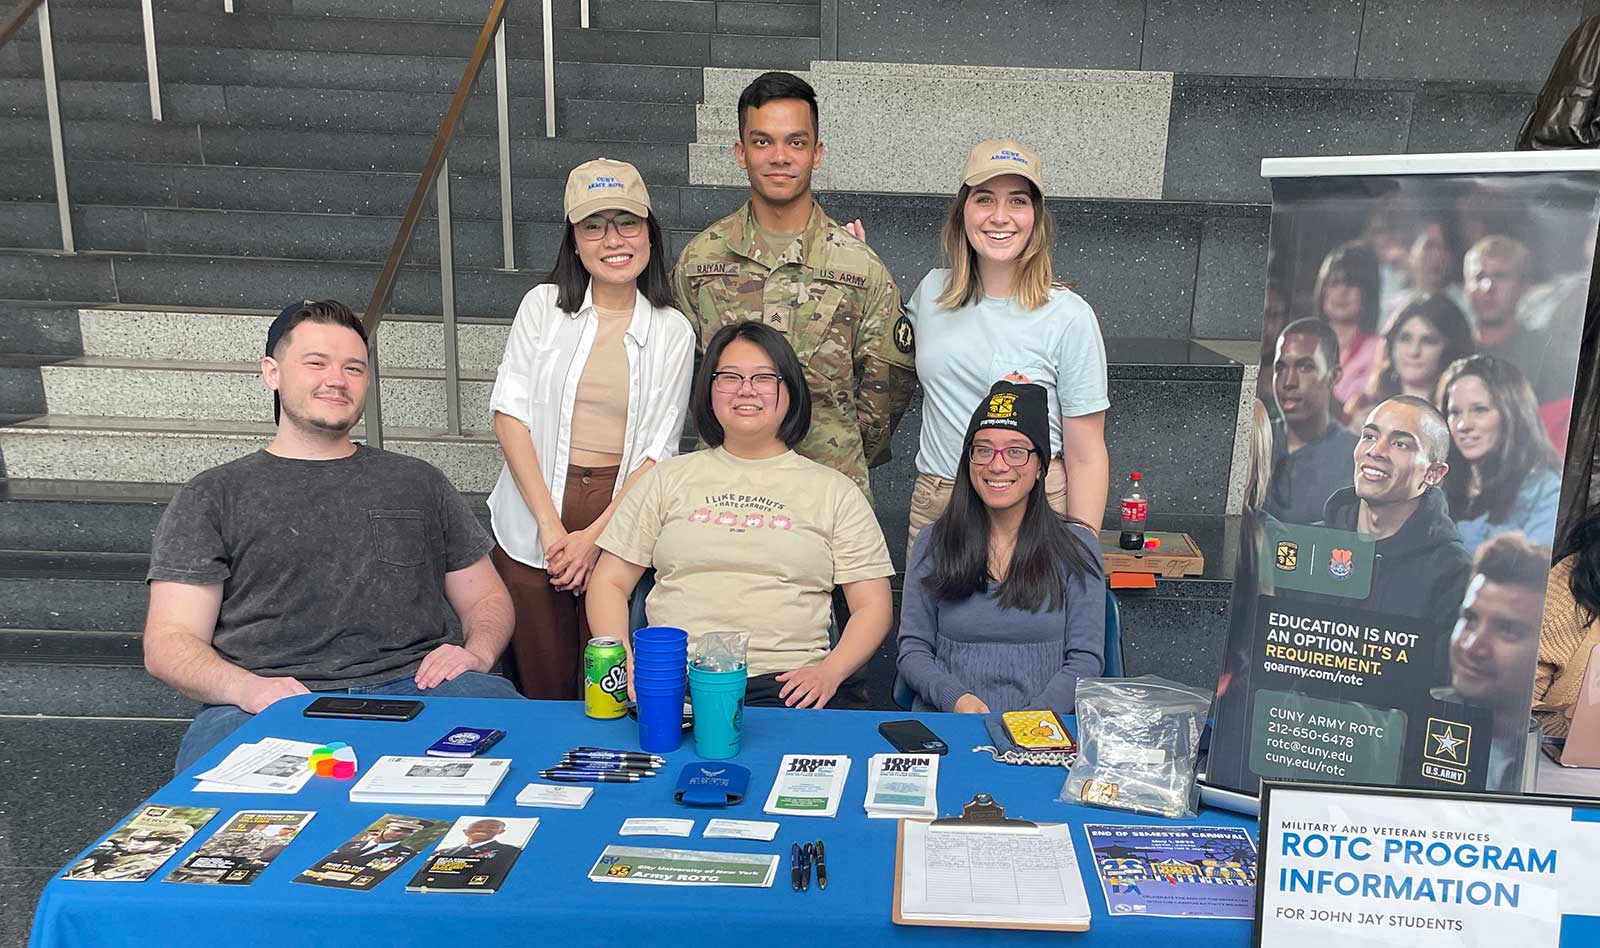 Students and Veterans at ROTC Program table